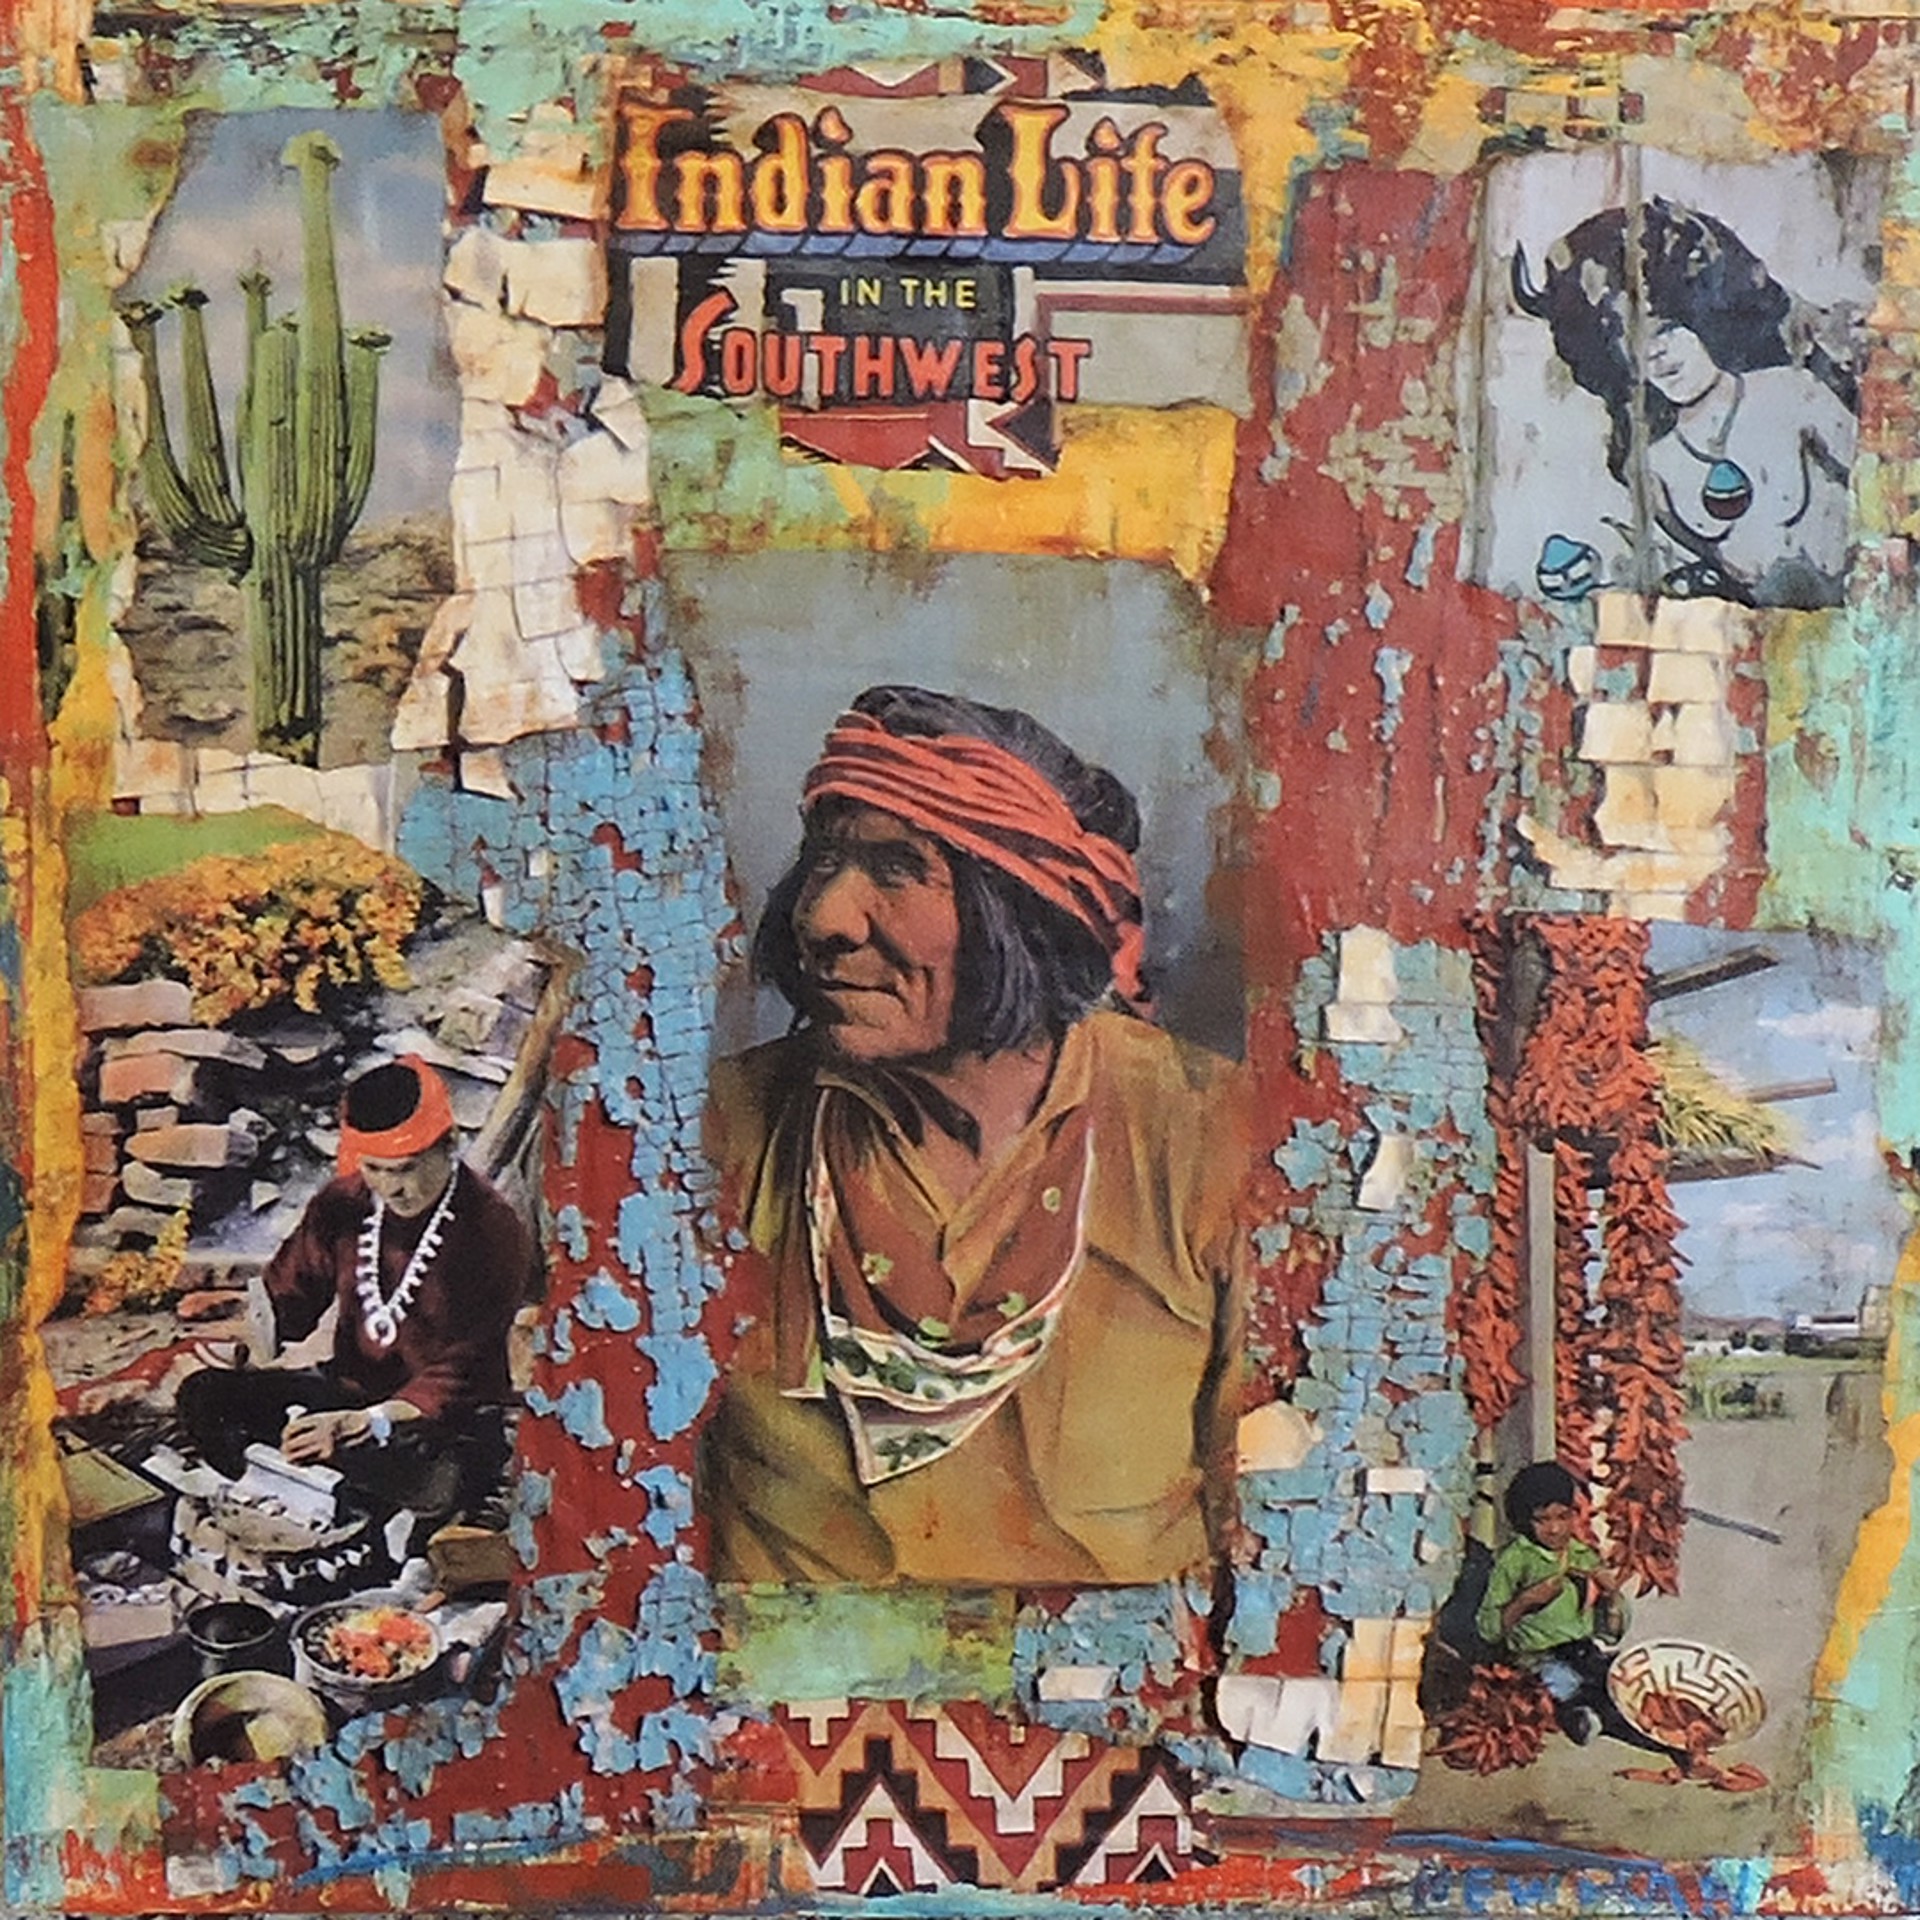 Indian Life in the Southwest by Dave Newman